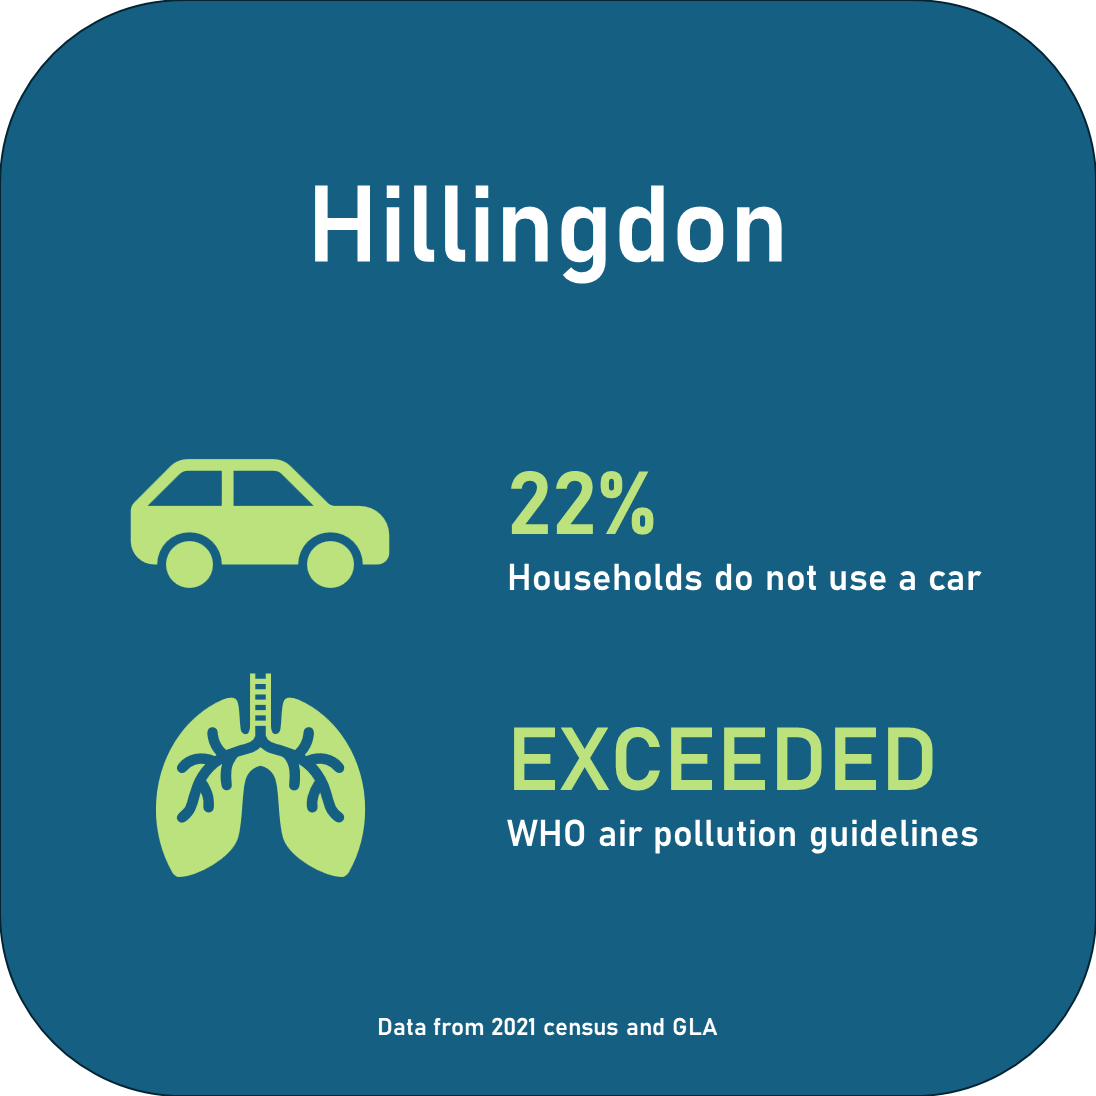 22% households do not use a car. Exceeded WHO air pollution guidelines.